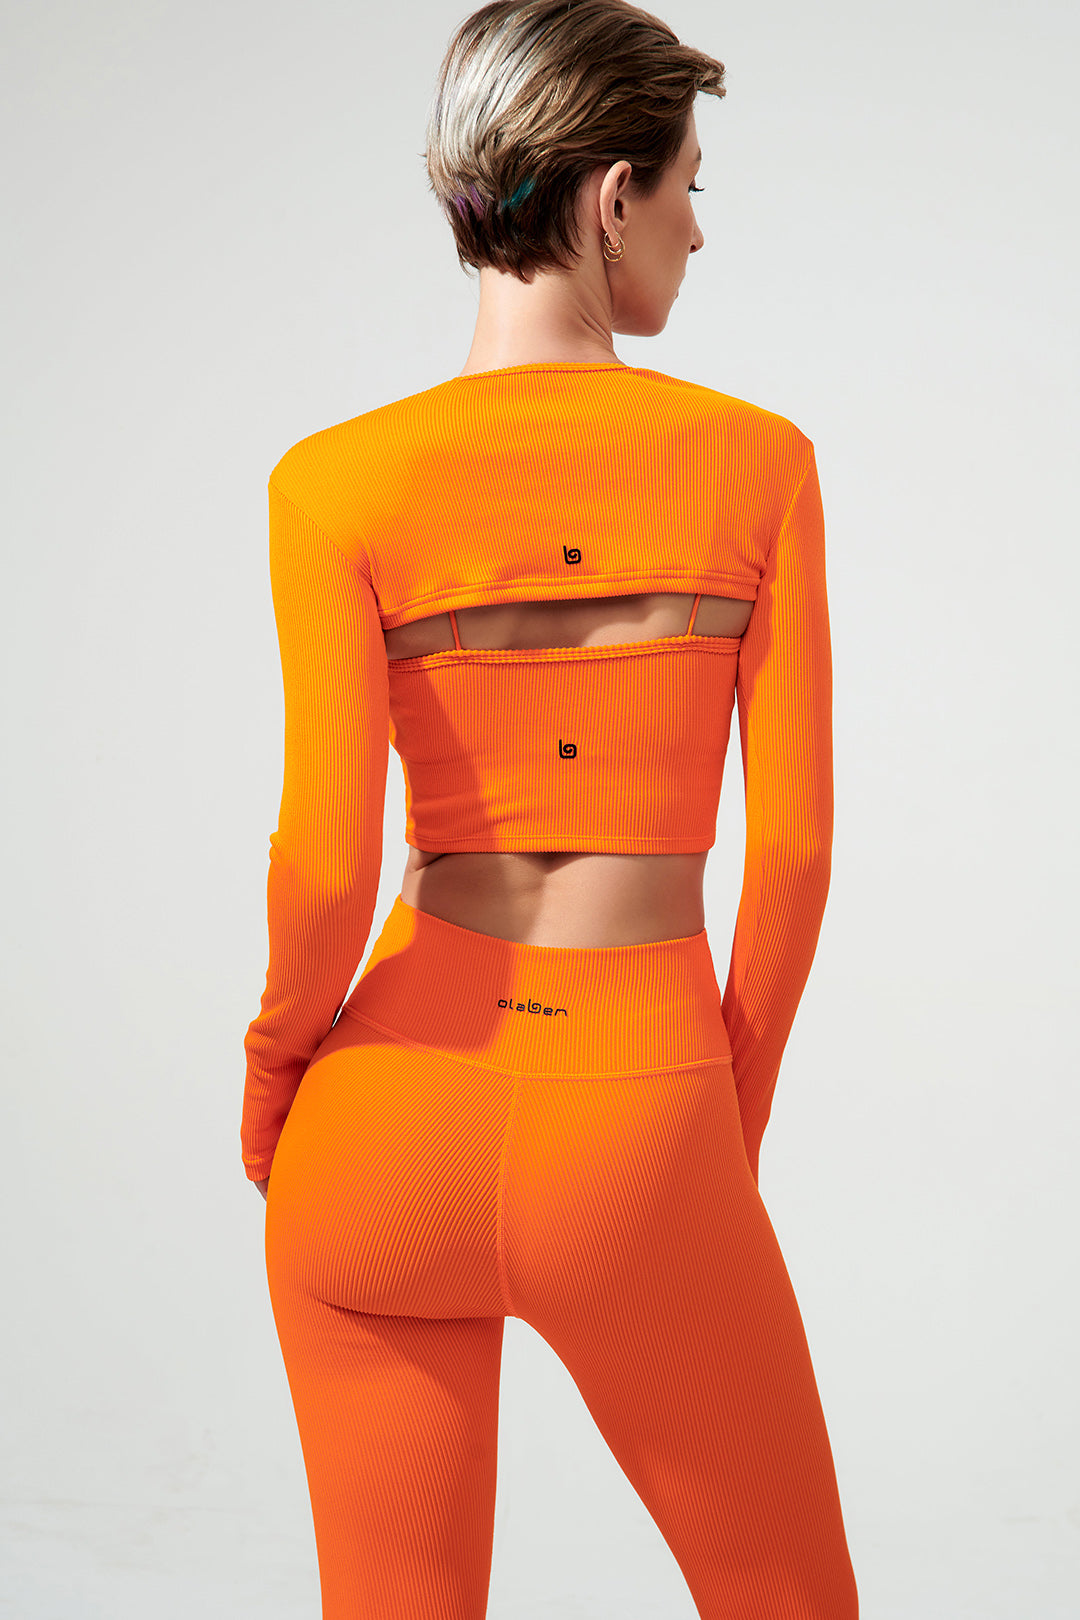 Vibrant tangerine orange women's long sleeve shirt with envy design, perfect for any occasion.